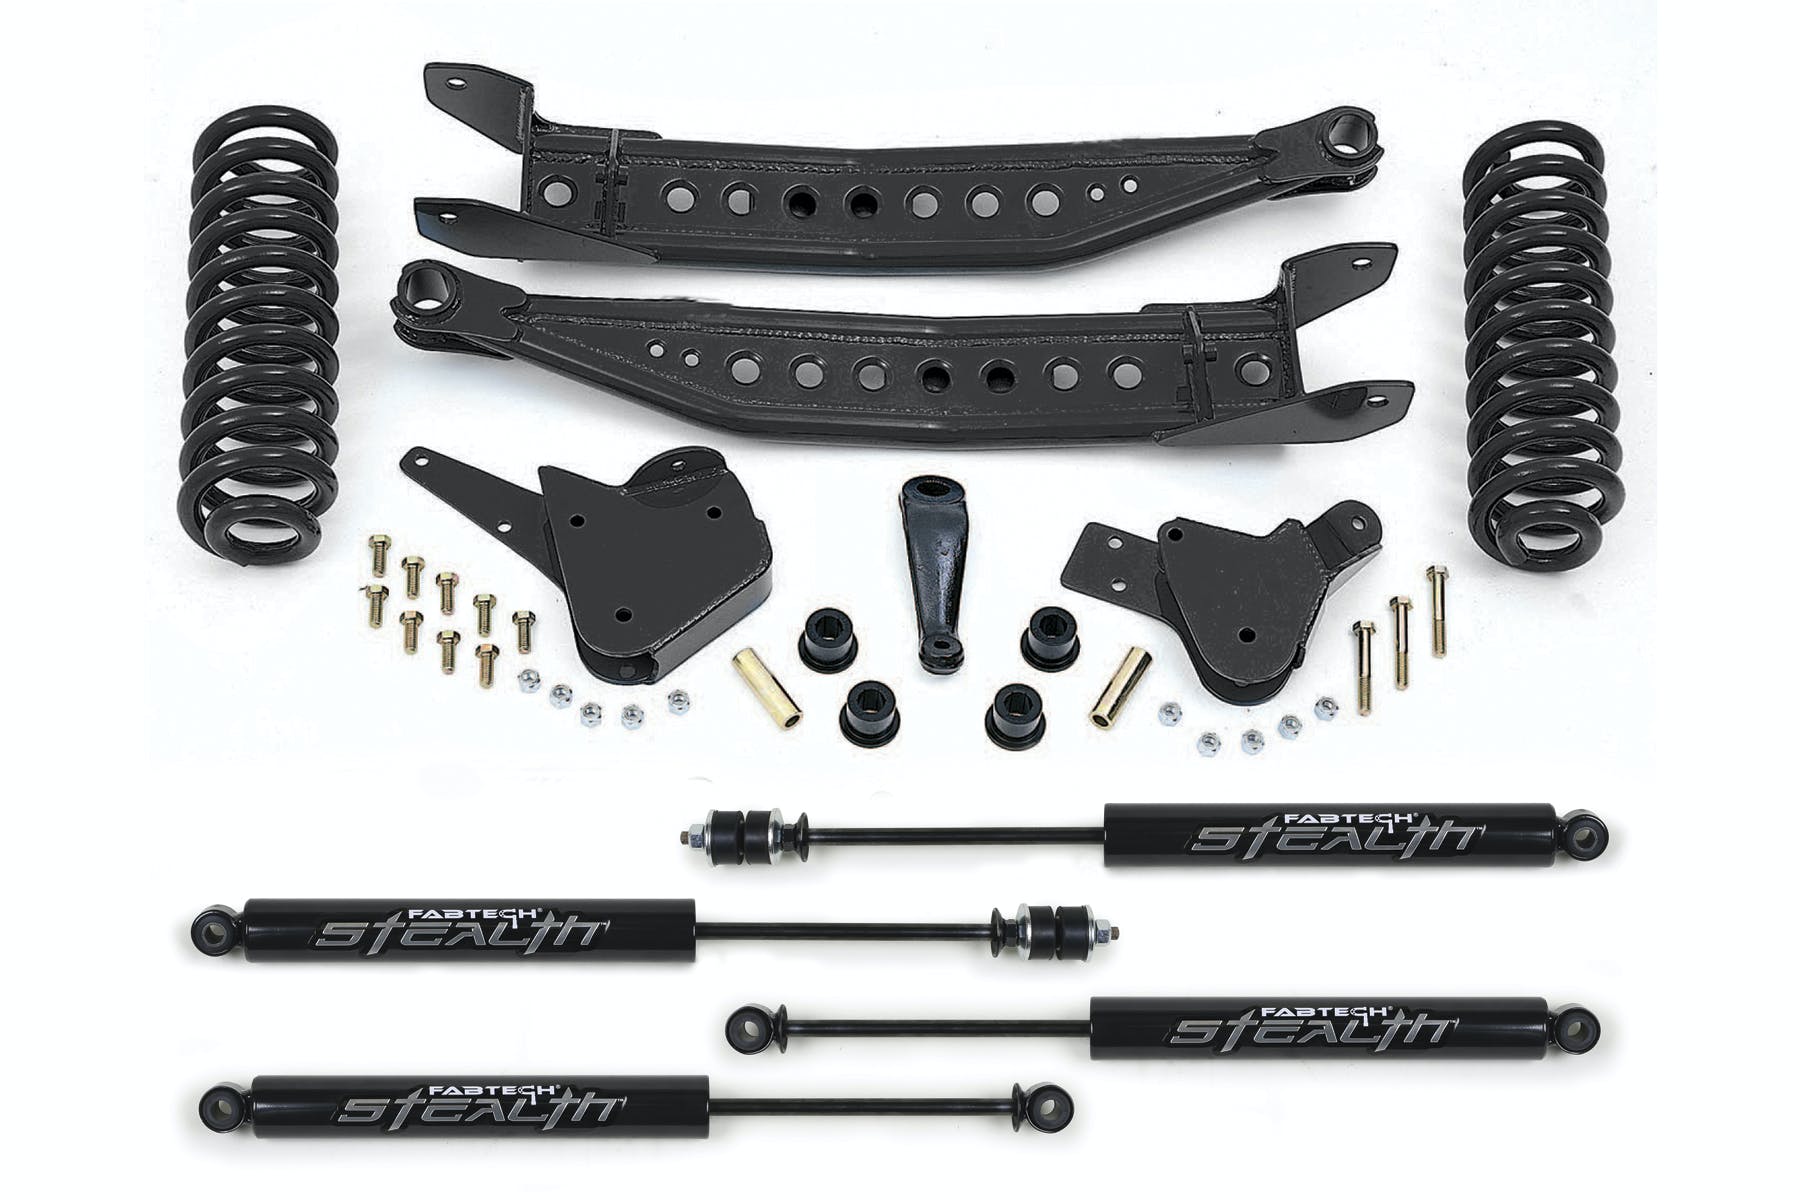 Fabtech K20631M 6in. PERF SYS W/STEALTH 08-10 FORD F250 2WD V8 GAS